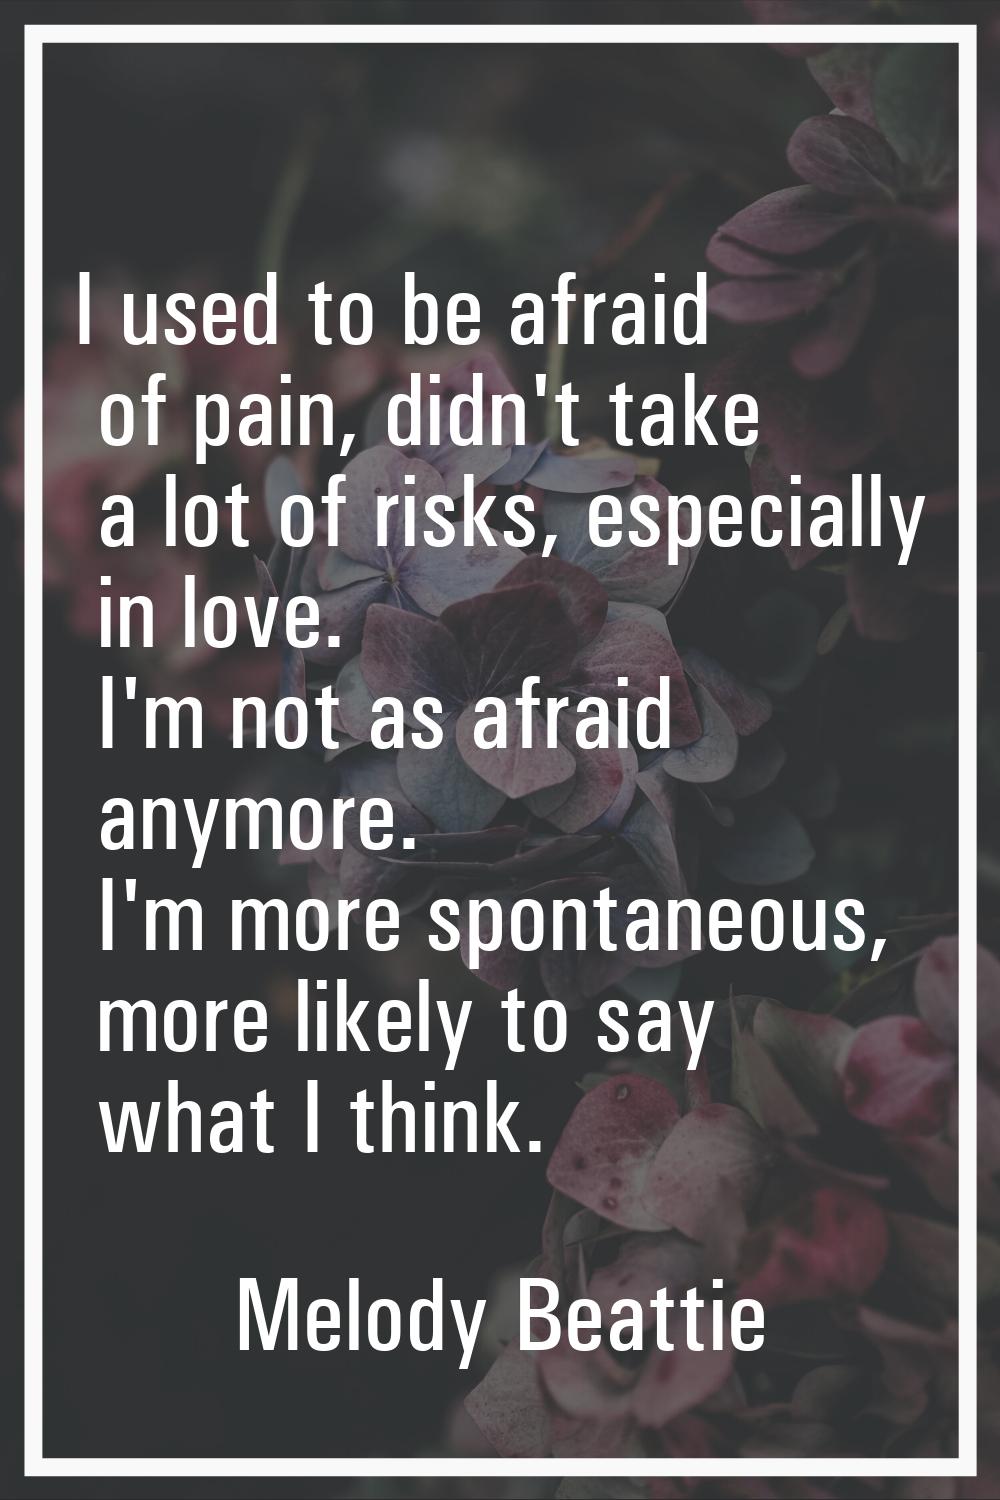 I used to be afraid of pain, didn't take a lot of risks, especially in love. I'm not as afraid anym